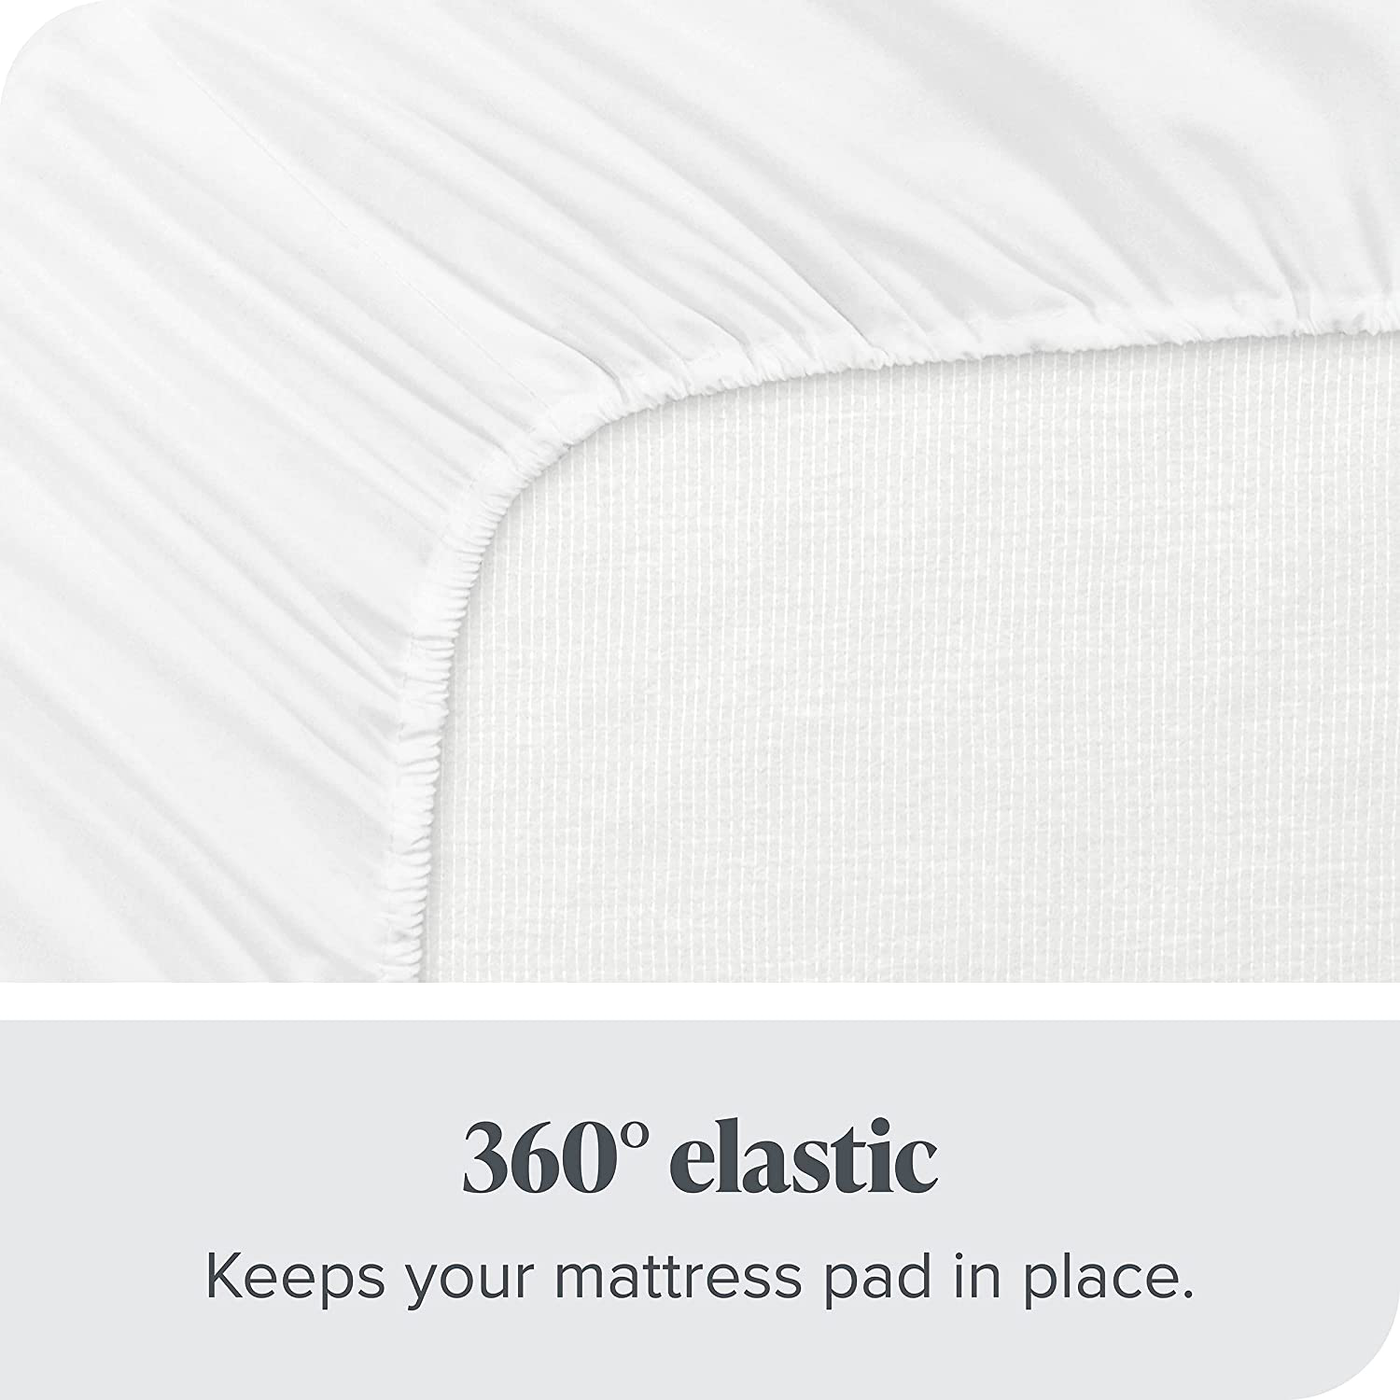 Bare Home Quilted Fitted Mattress Pad (Cal King) - Cooling Mattress Topper - Easily Washable - Elastic Fitted Mattress Cover - Stretch-to-Fit up to 15 Inches Deep (California King)